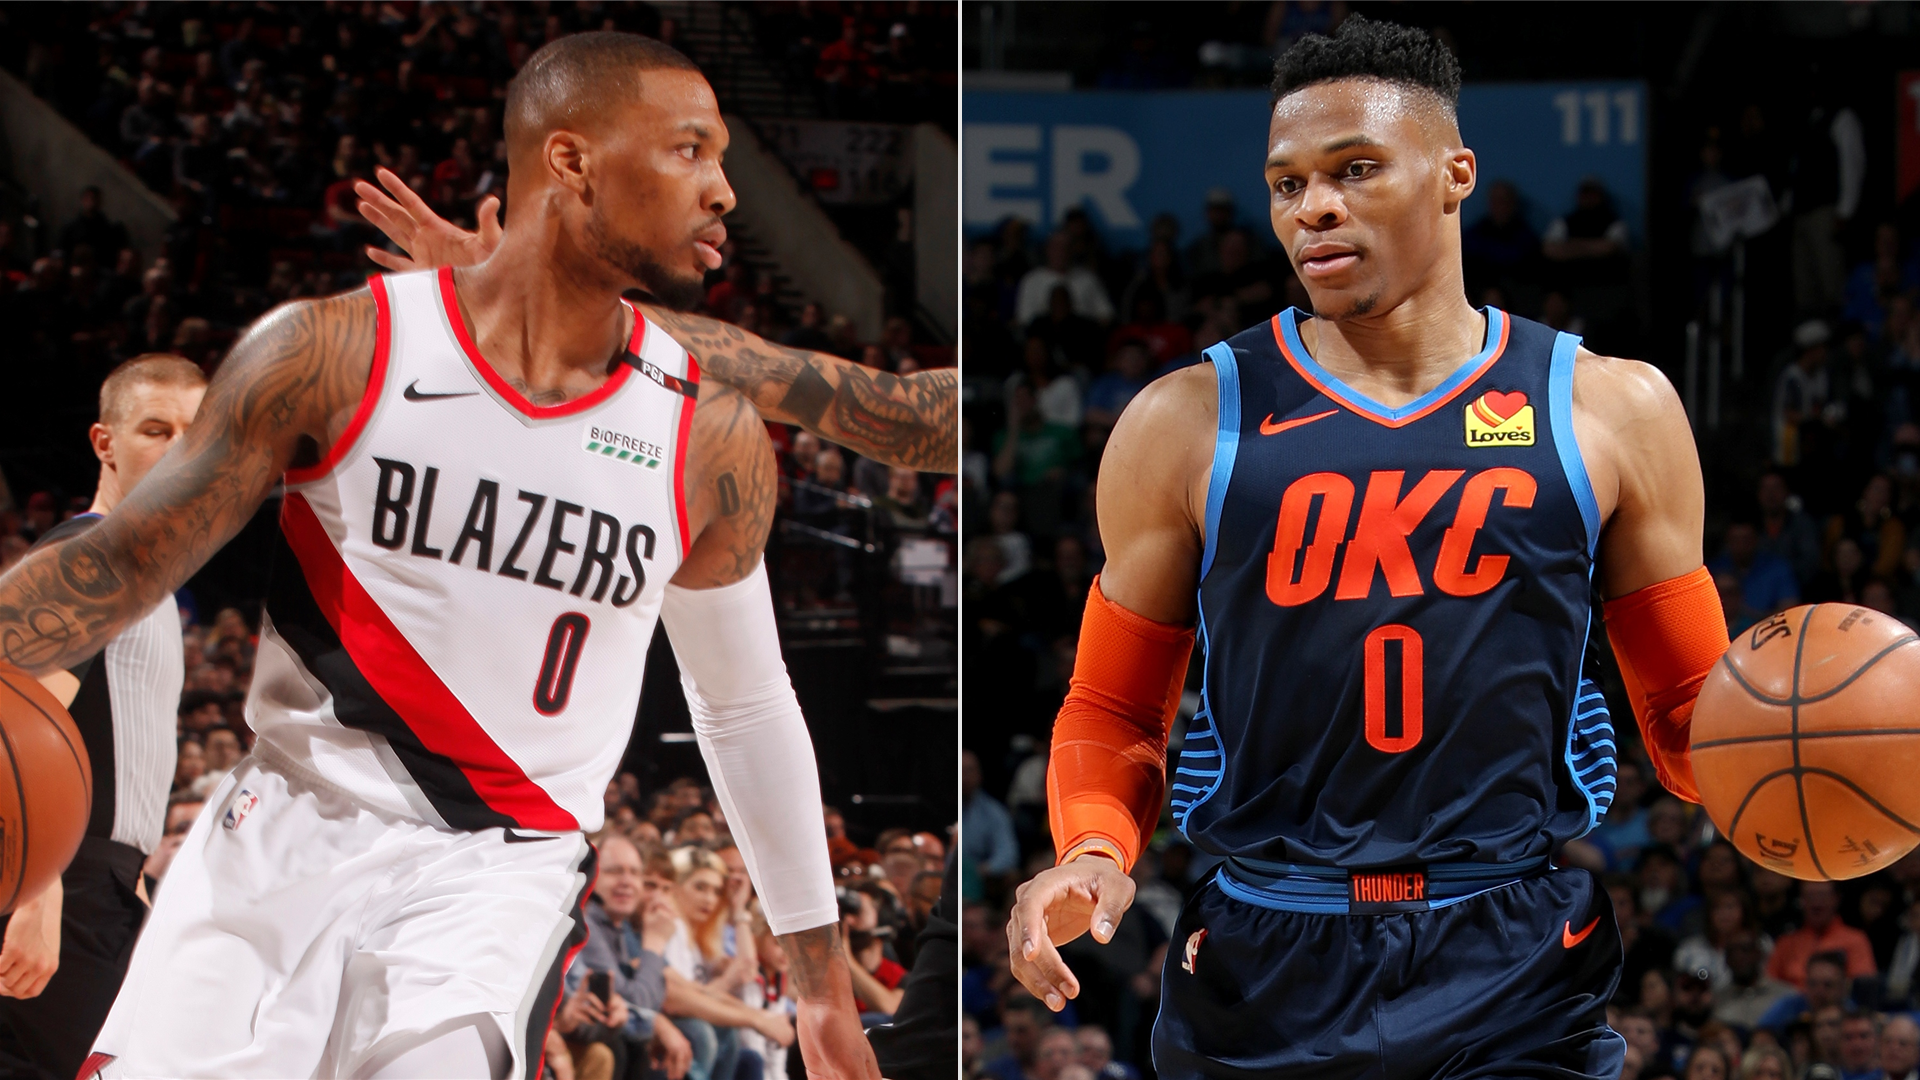 Blazers clinch sixth straight playoff berth, while Thunder fall to eighth seed | NBA ...1920 x 1080